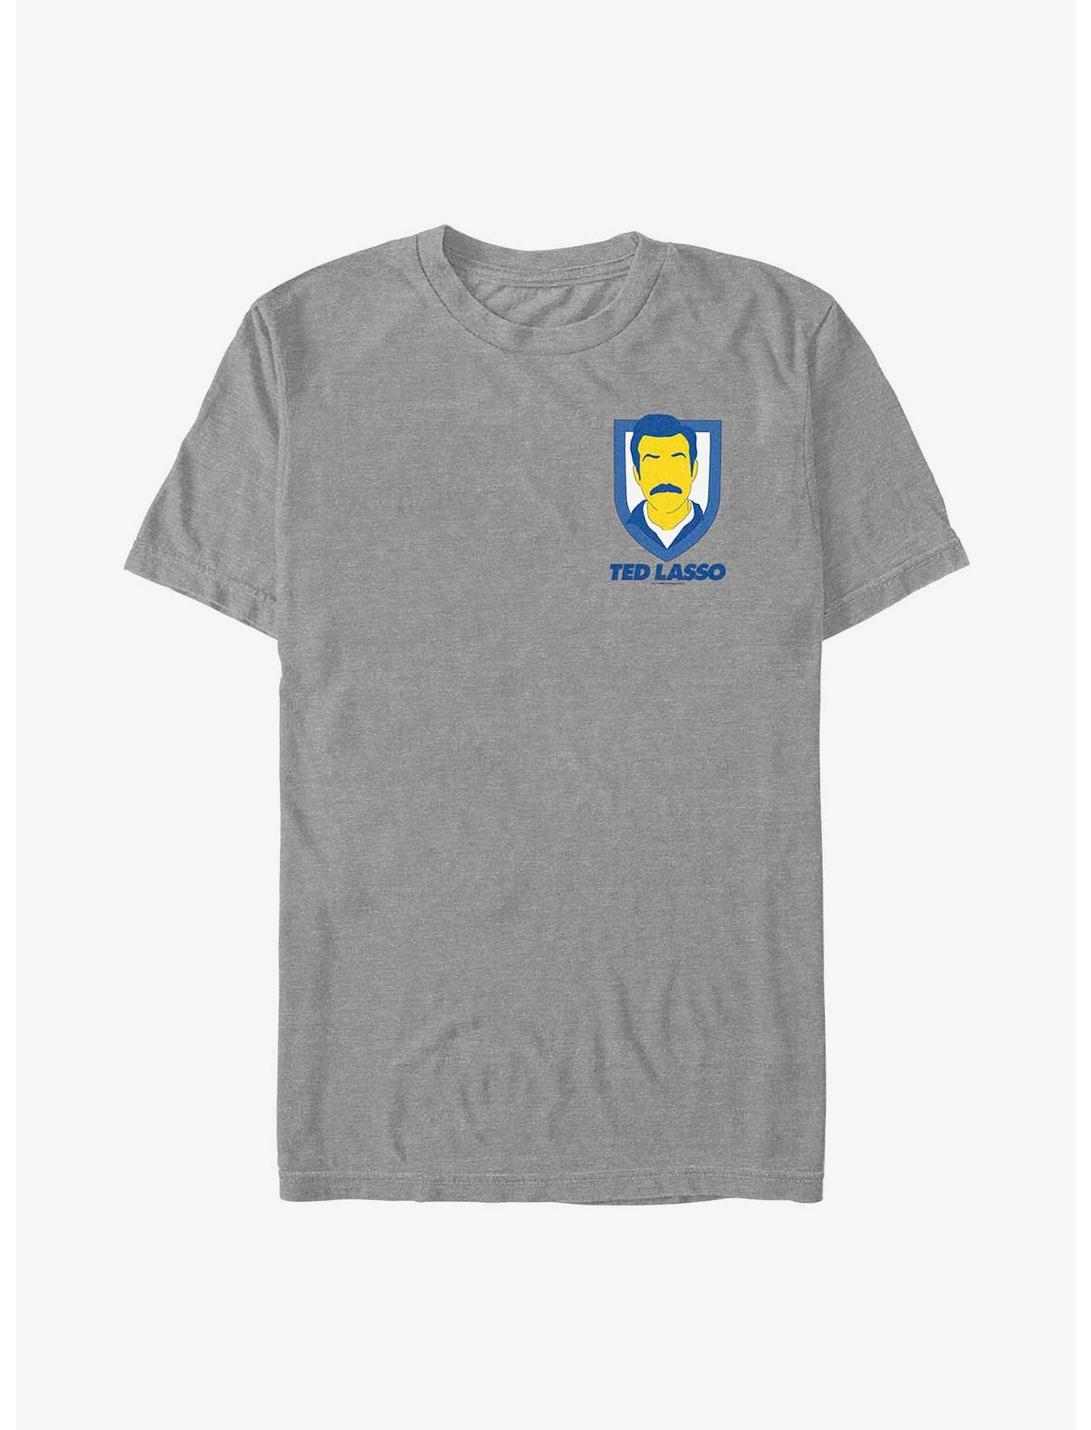 Ted Lasso Shield T-shirt, DRKGRY HTR, hi-res